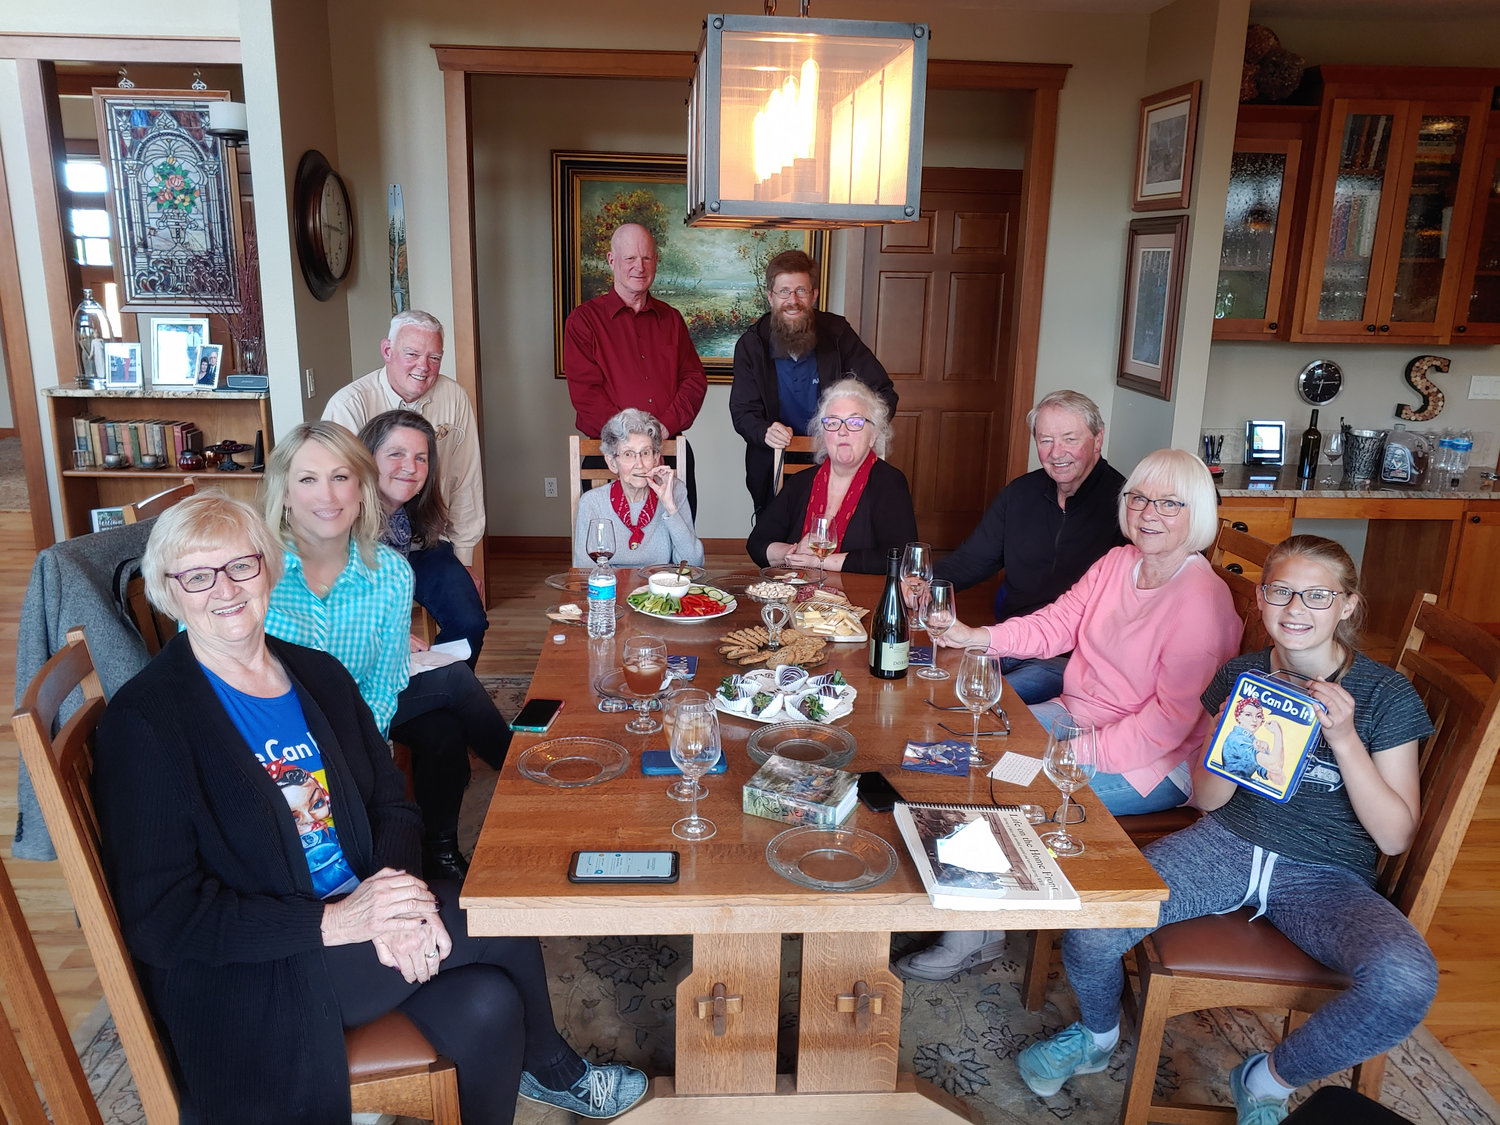 From left, Edna Fund, Debbie Schinnell, Robin Murphy, Peter Lahmann, Doris Bier and Cynthia Payne (seated) with Kahle Jennings and Brian Mittge standing, Ron Burger, Brigitte Burger and Elizabeth Mittge.